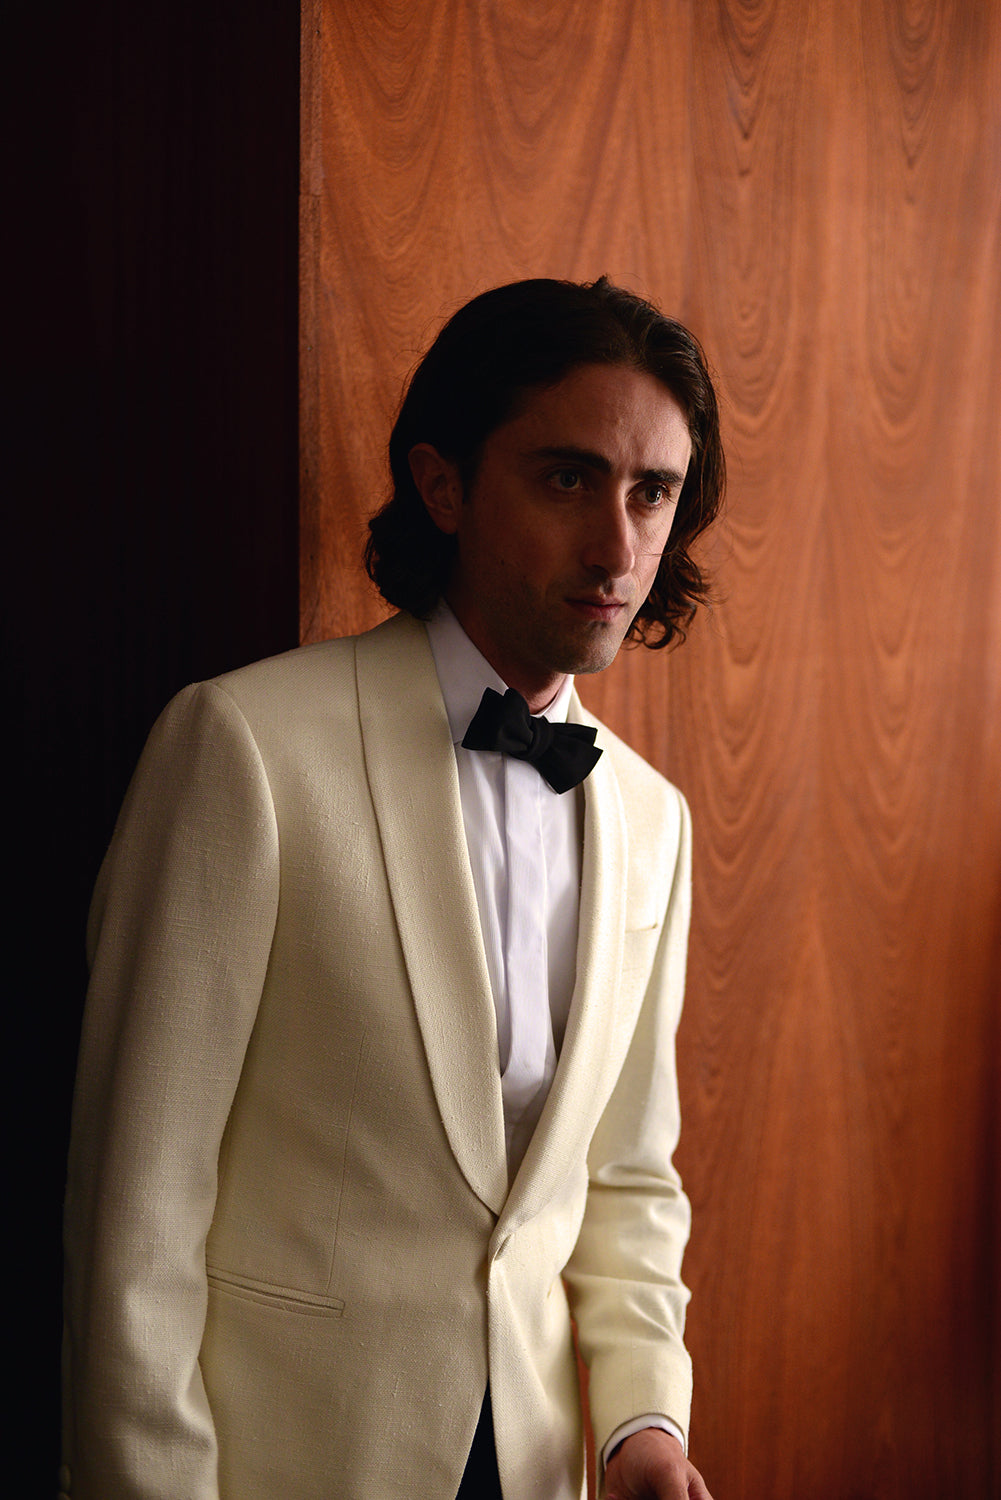 Brooklyn Tailors BKT50 Shawl Collar Dinner Jacket in Silk & Wool Hopsack - Ivory on-body shot. Model is wearing jacket with white tuxedo shirt and black bowtie.